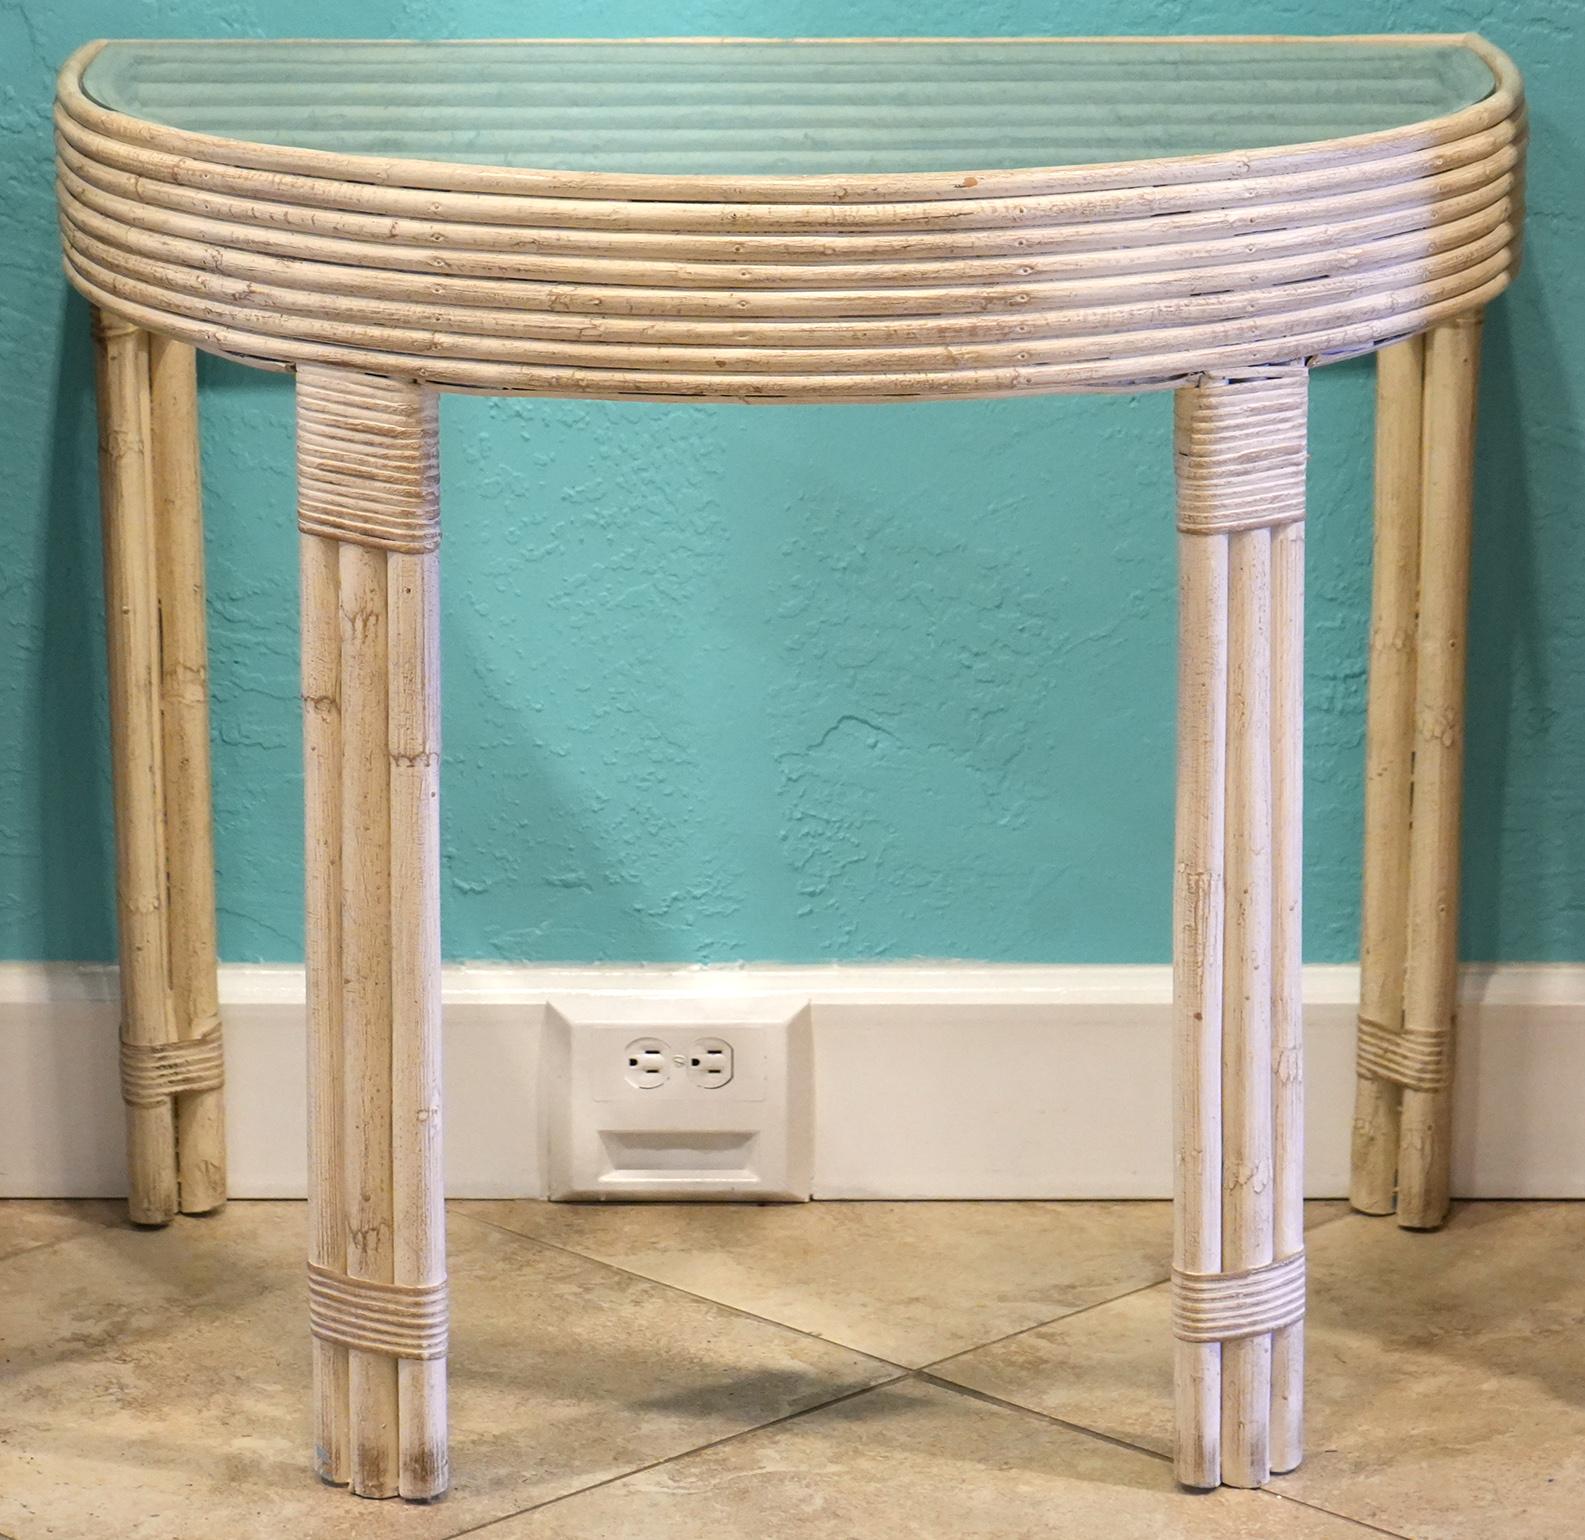 Of a great design and color these console tables exudes a timeless quality that will fit into any modern or traditional interior. The tempered class tops rest on a frame featuring bent reed on both sides and supported by three piece wrapped bamboo